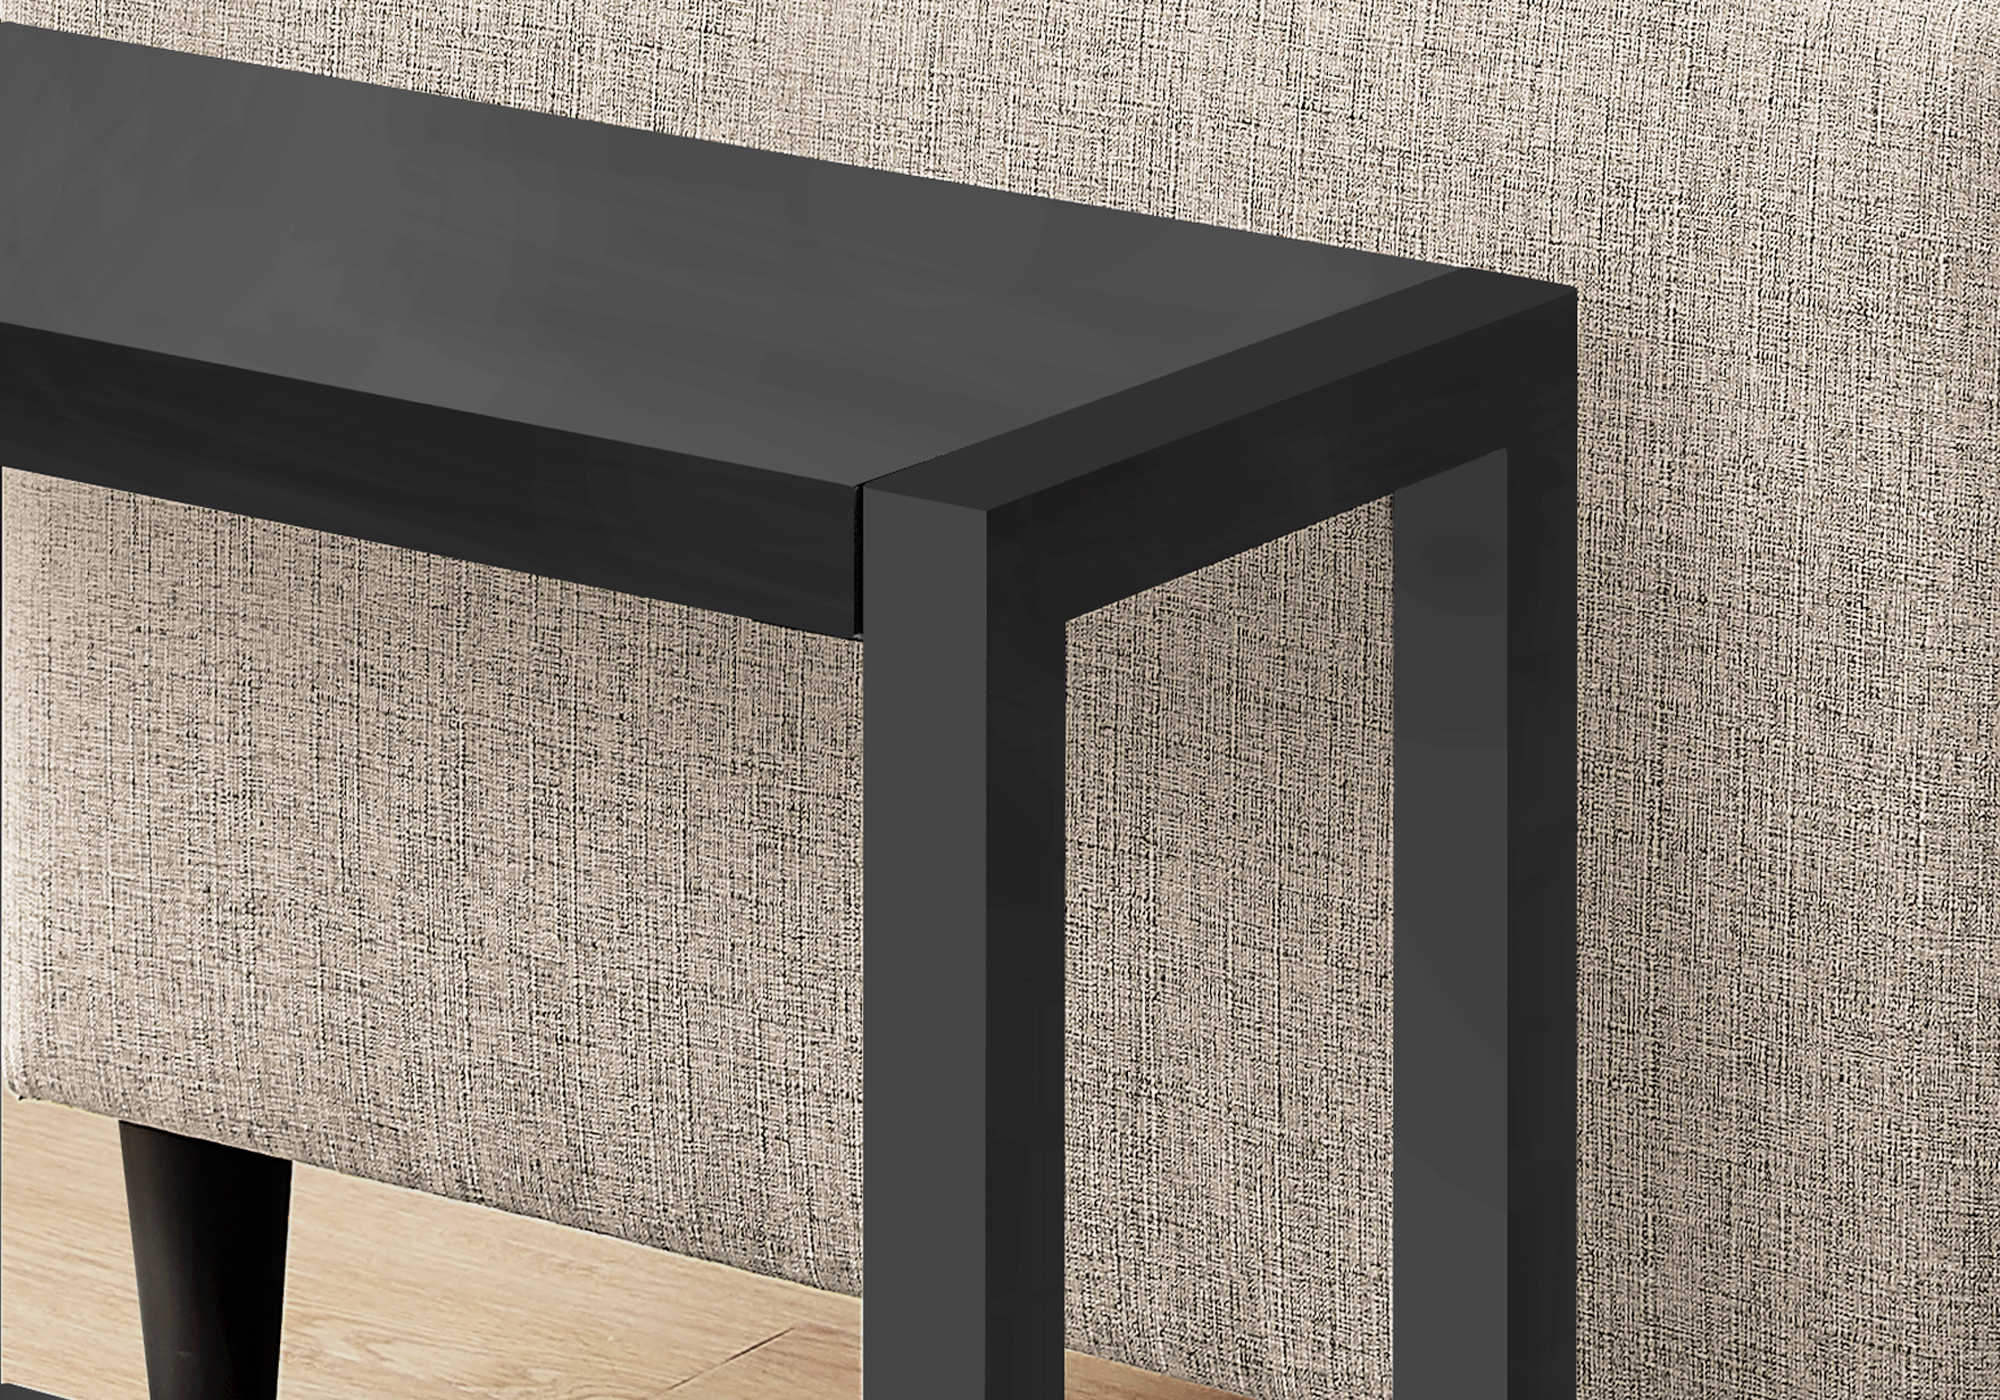 I 2081 - ACCENT TABLE - 22"H / BLACK / BLACK METAL BY MONARCH SPECIALTIES INC